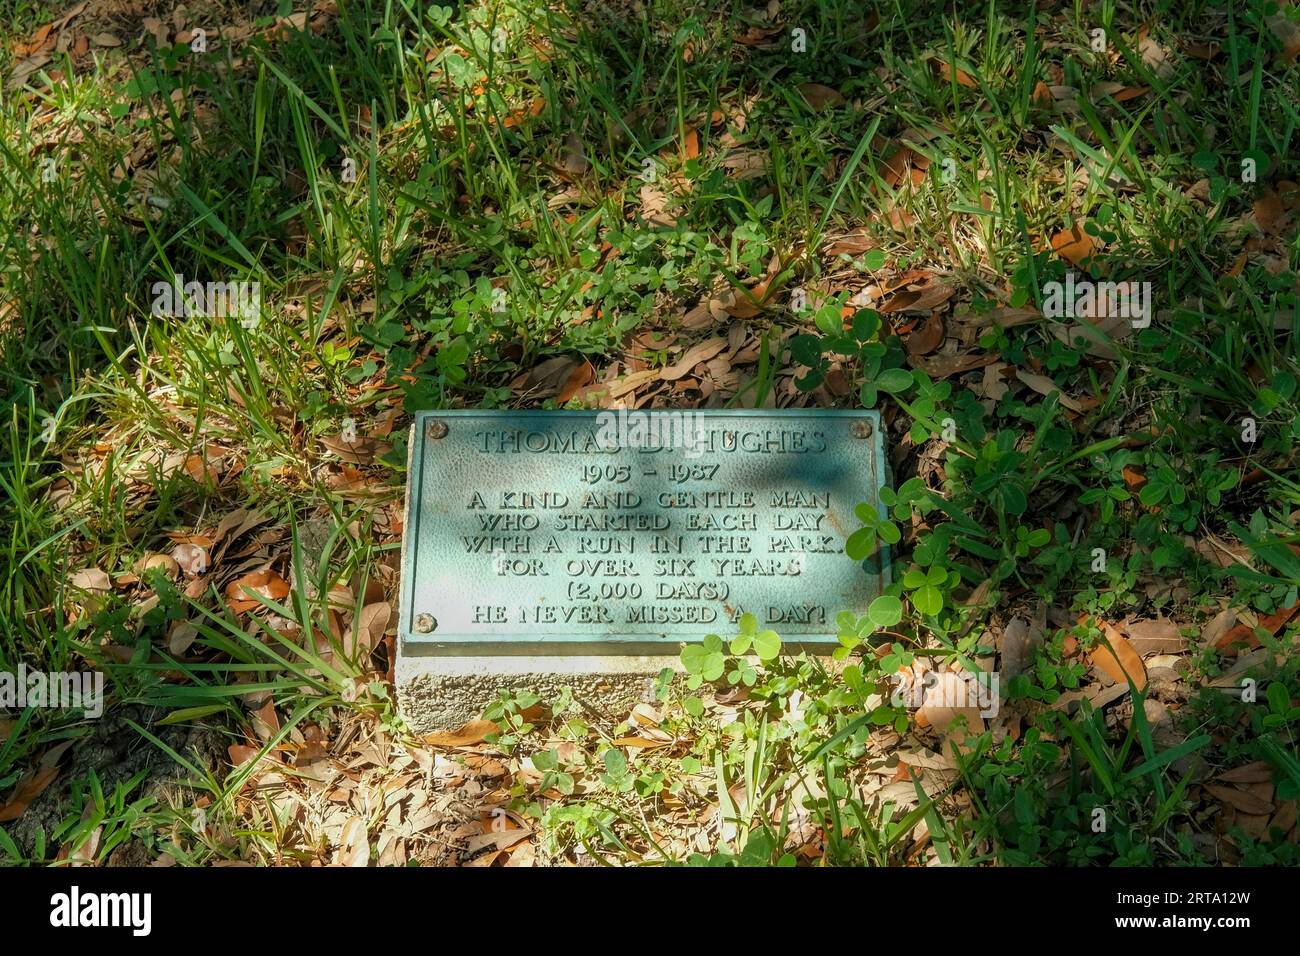 NEW ORLEANS, LA, USA - AUGUST 30, 2023: Plaque commemorating Thomas D. Hughes, a gentle man who ran every day for over six years in Audubon Park Stock Photo